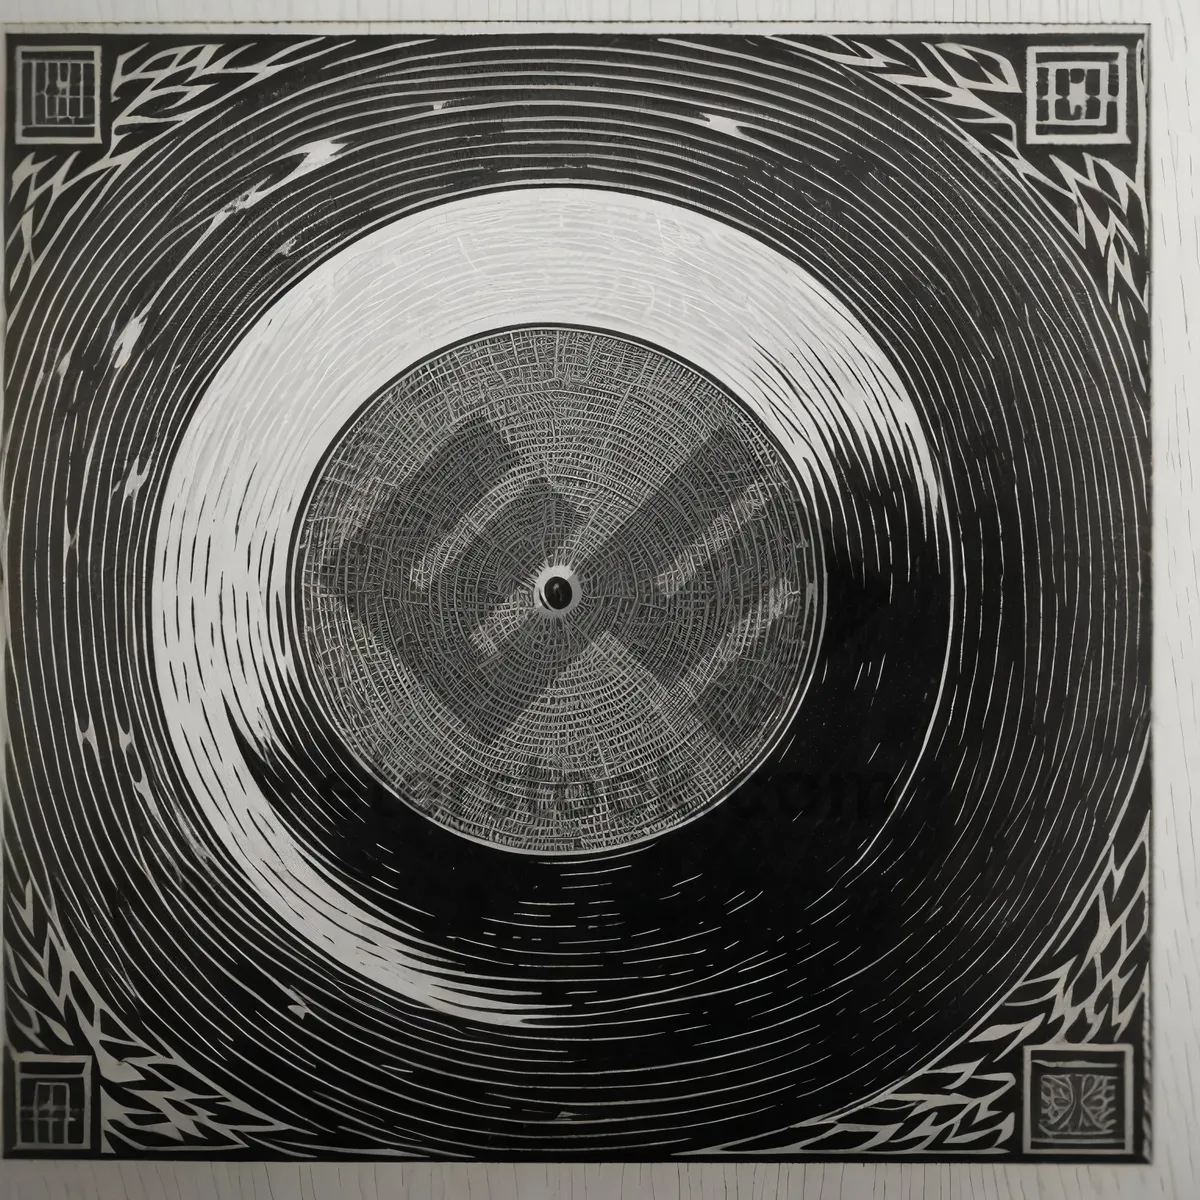 Picture of Digital Circle Design: Technology meets Phonograph Record